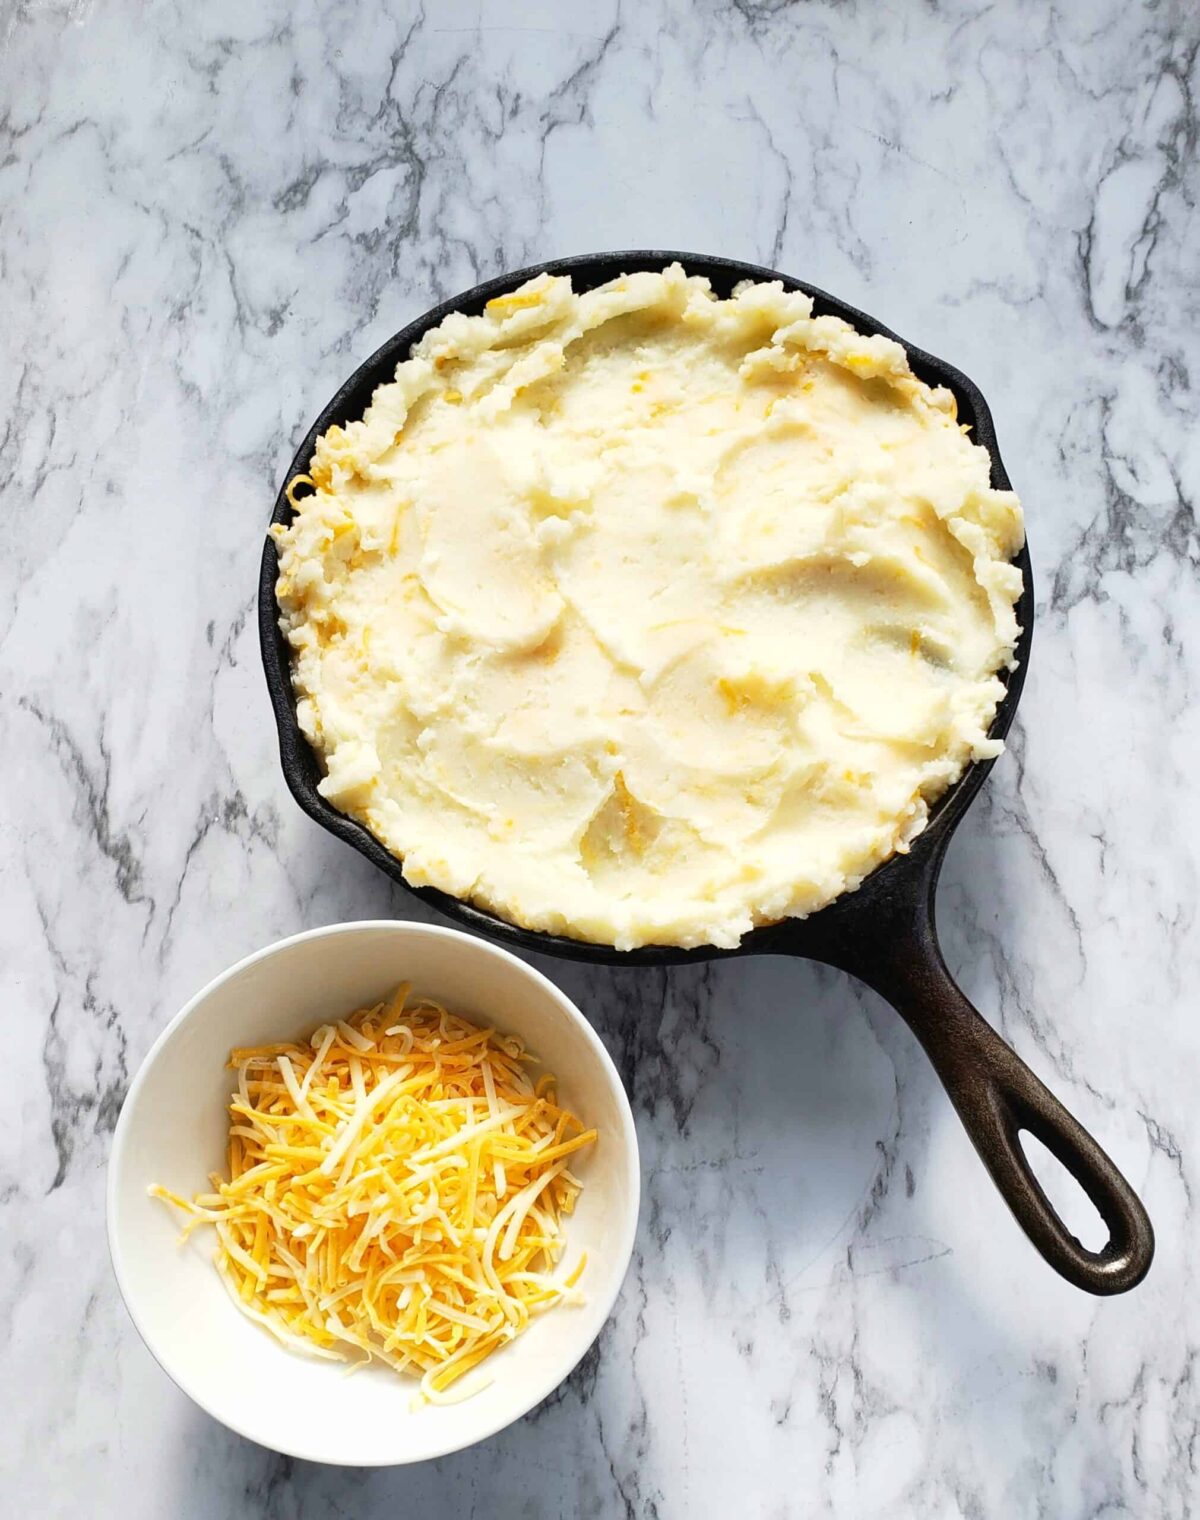 Cast iron skillet full of mashed potatoes. Small white bowl of shredded cheese